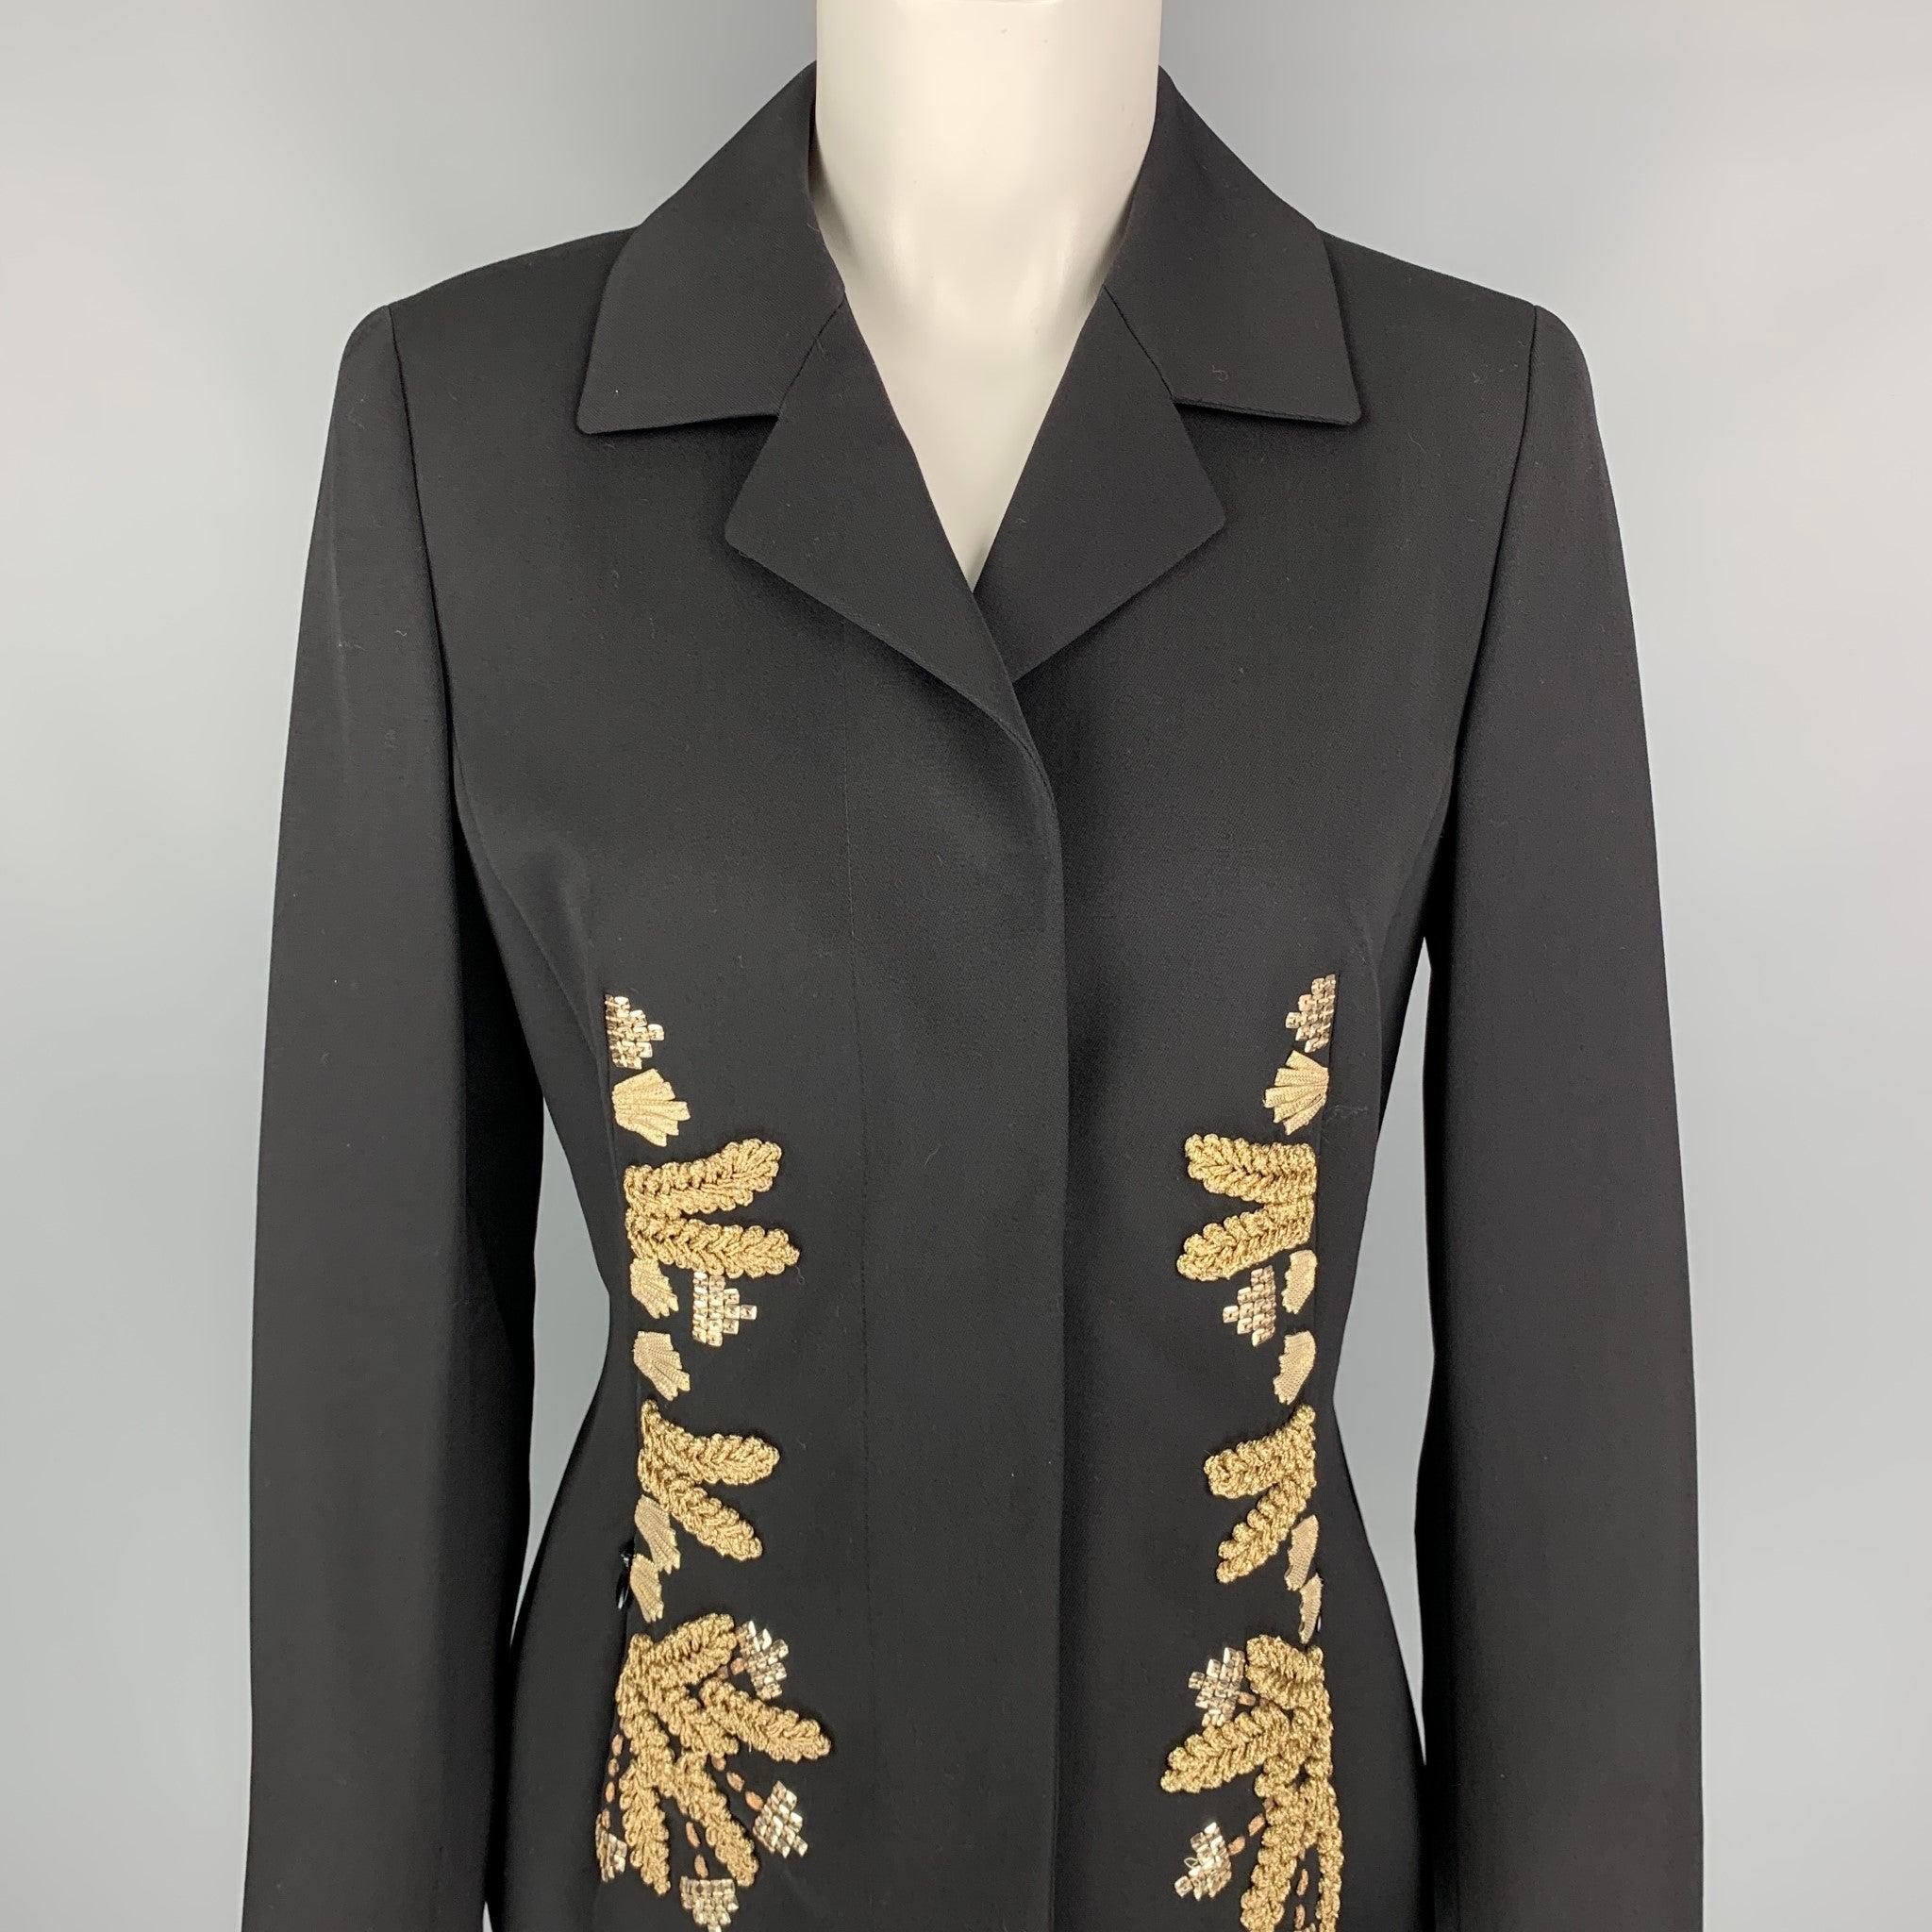 ESCADA jacket comes in a black virgin wool with a full liner featuring a notch lapel, gold tone embellishment details, zipper pockets, and a hidden snap button closure.
New With Tags.
 

Marked:   36 

Measurements: 
 
Shoulder: 15.5 inches  Bust: